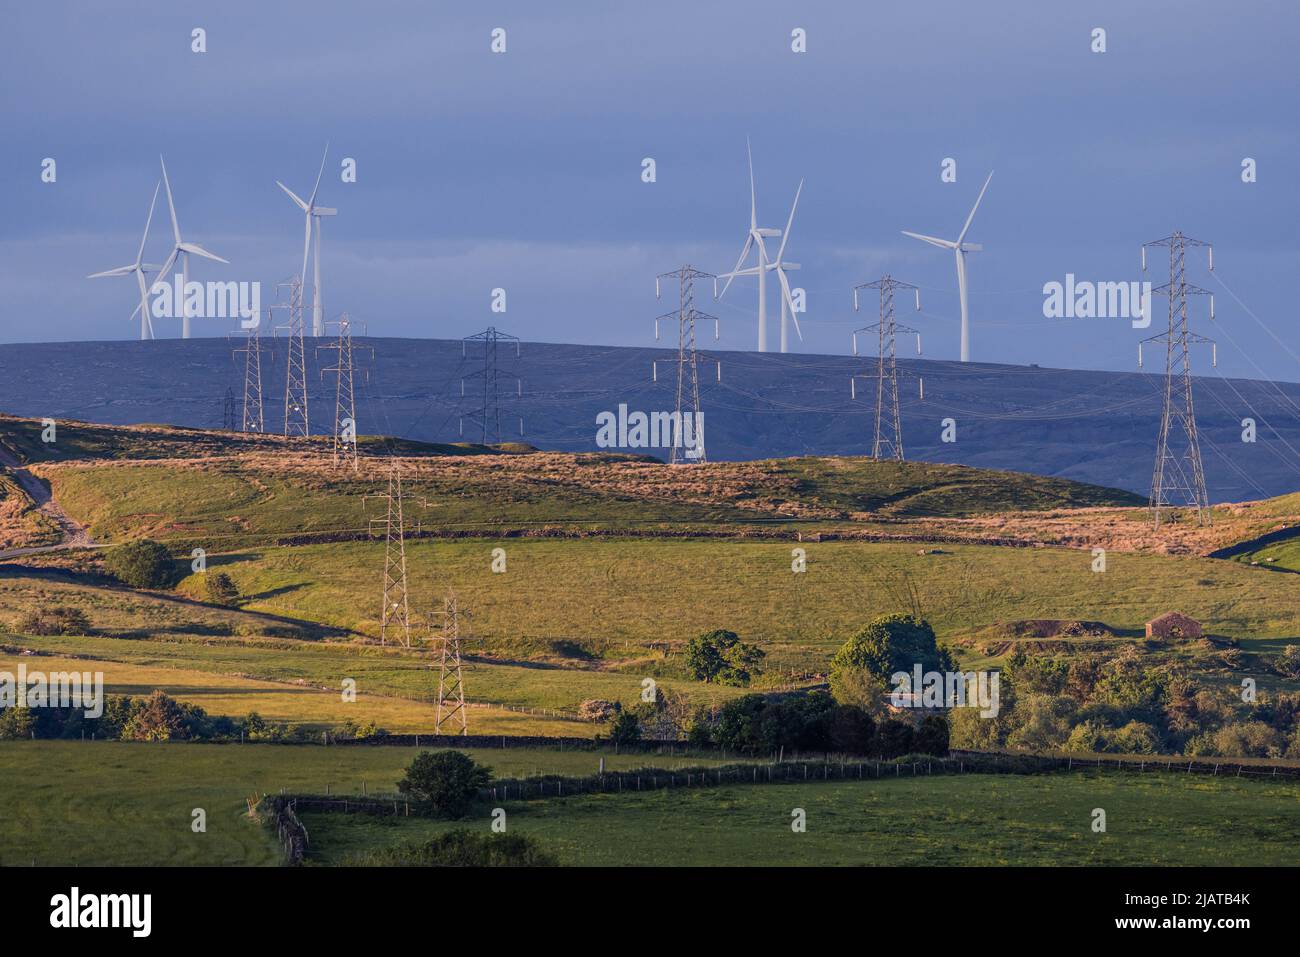 Wind farm and electricity pylons in Bury countryside. Stock Photo